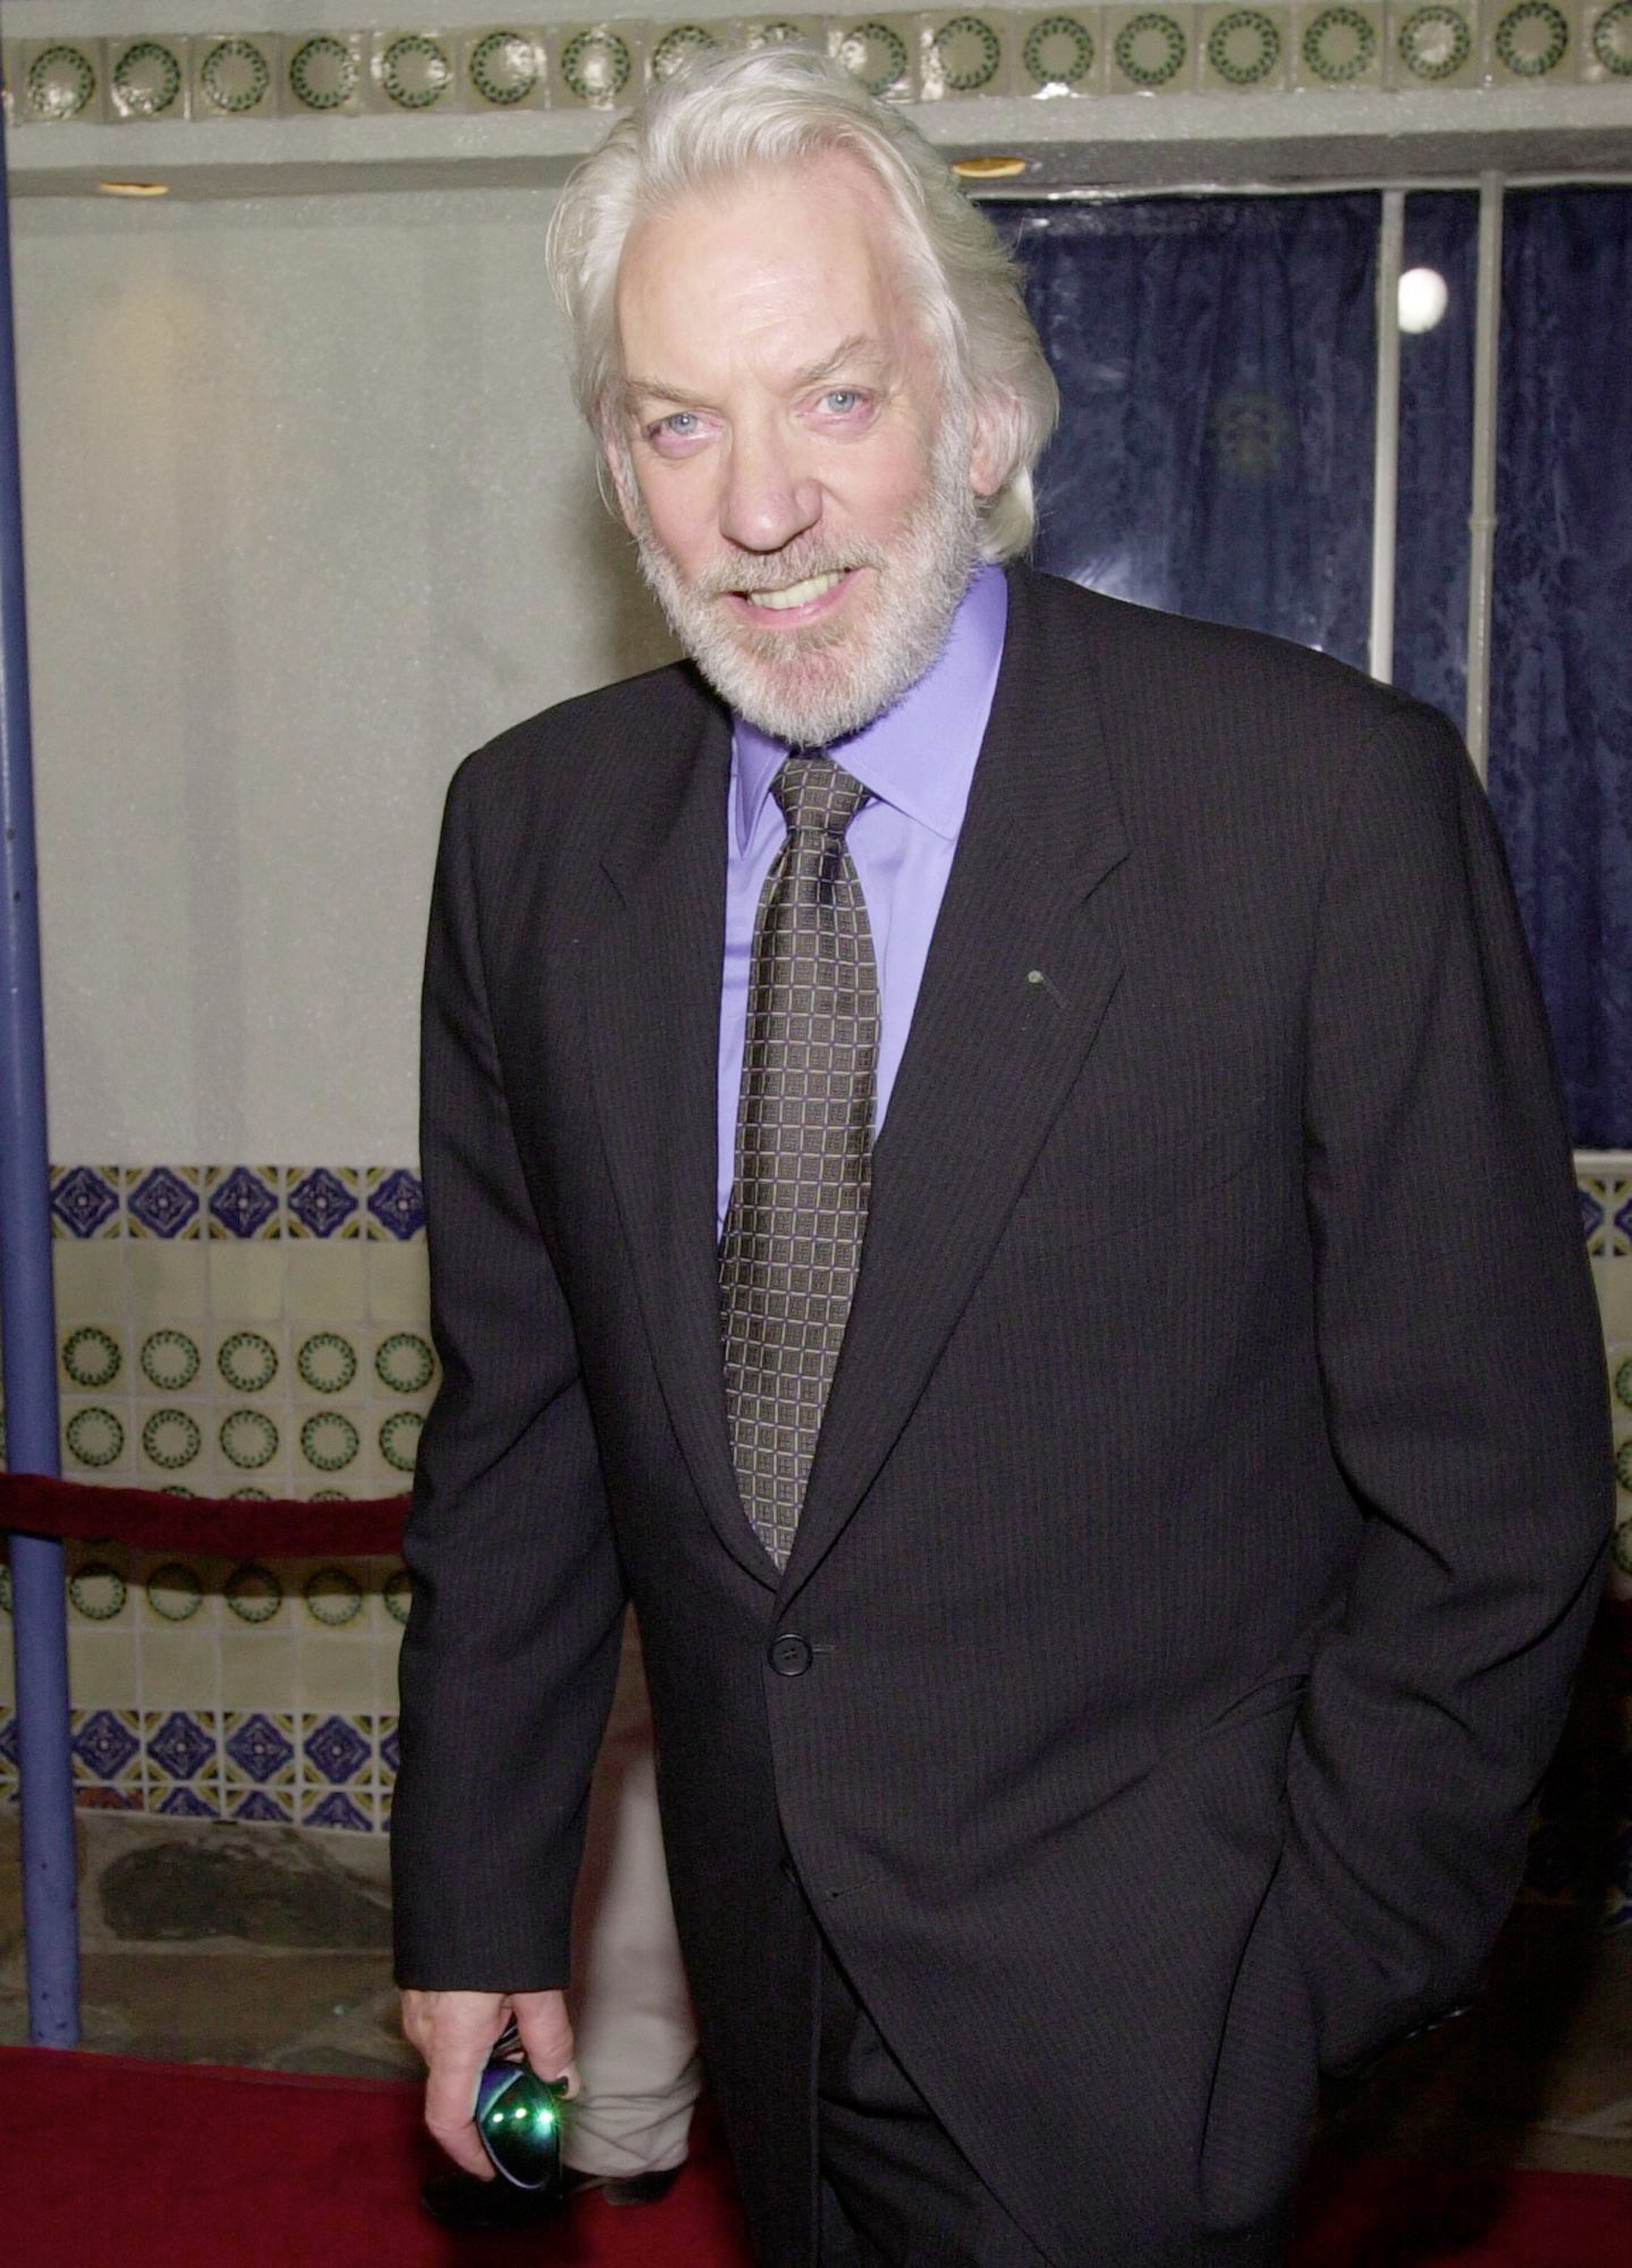 Donald Sutherland at the premiere of "Space Cowboys" on August 1, 2000 in Westwood, California | Source: Getty Images